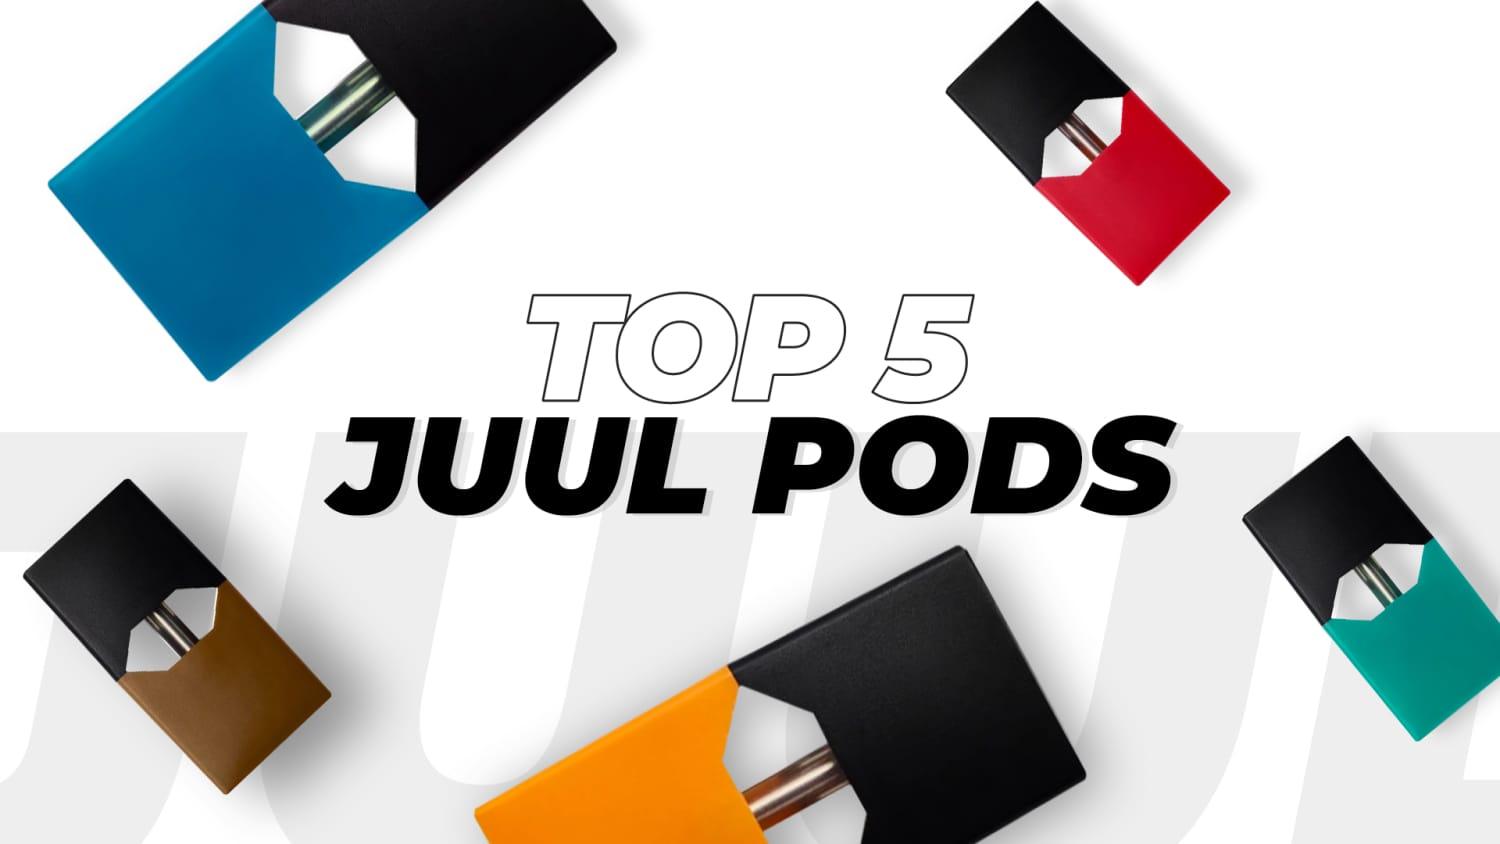 Top 5 JUUL Pods - Brand:Juul, Category:Pods & Cartridges, Sub Category:Prefilled Pods